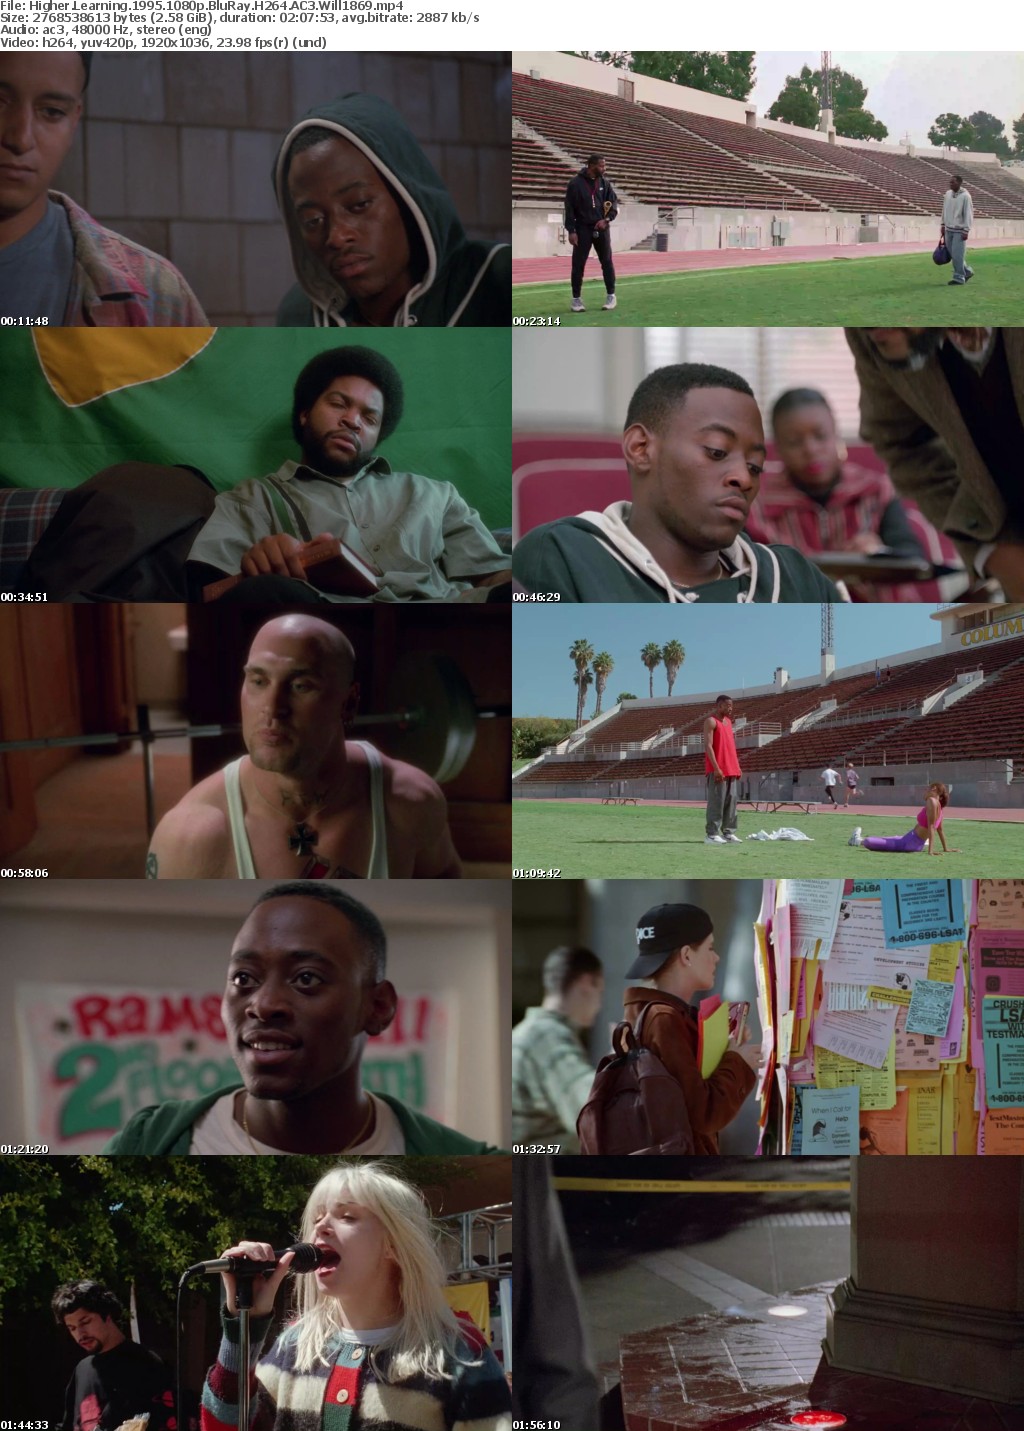 Higher Learning 1995 1080p BluRay H264 AC3 Will1869